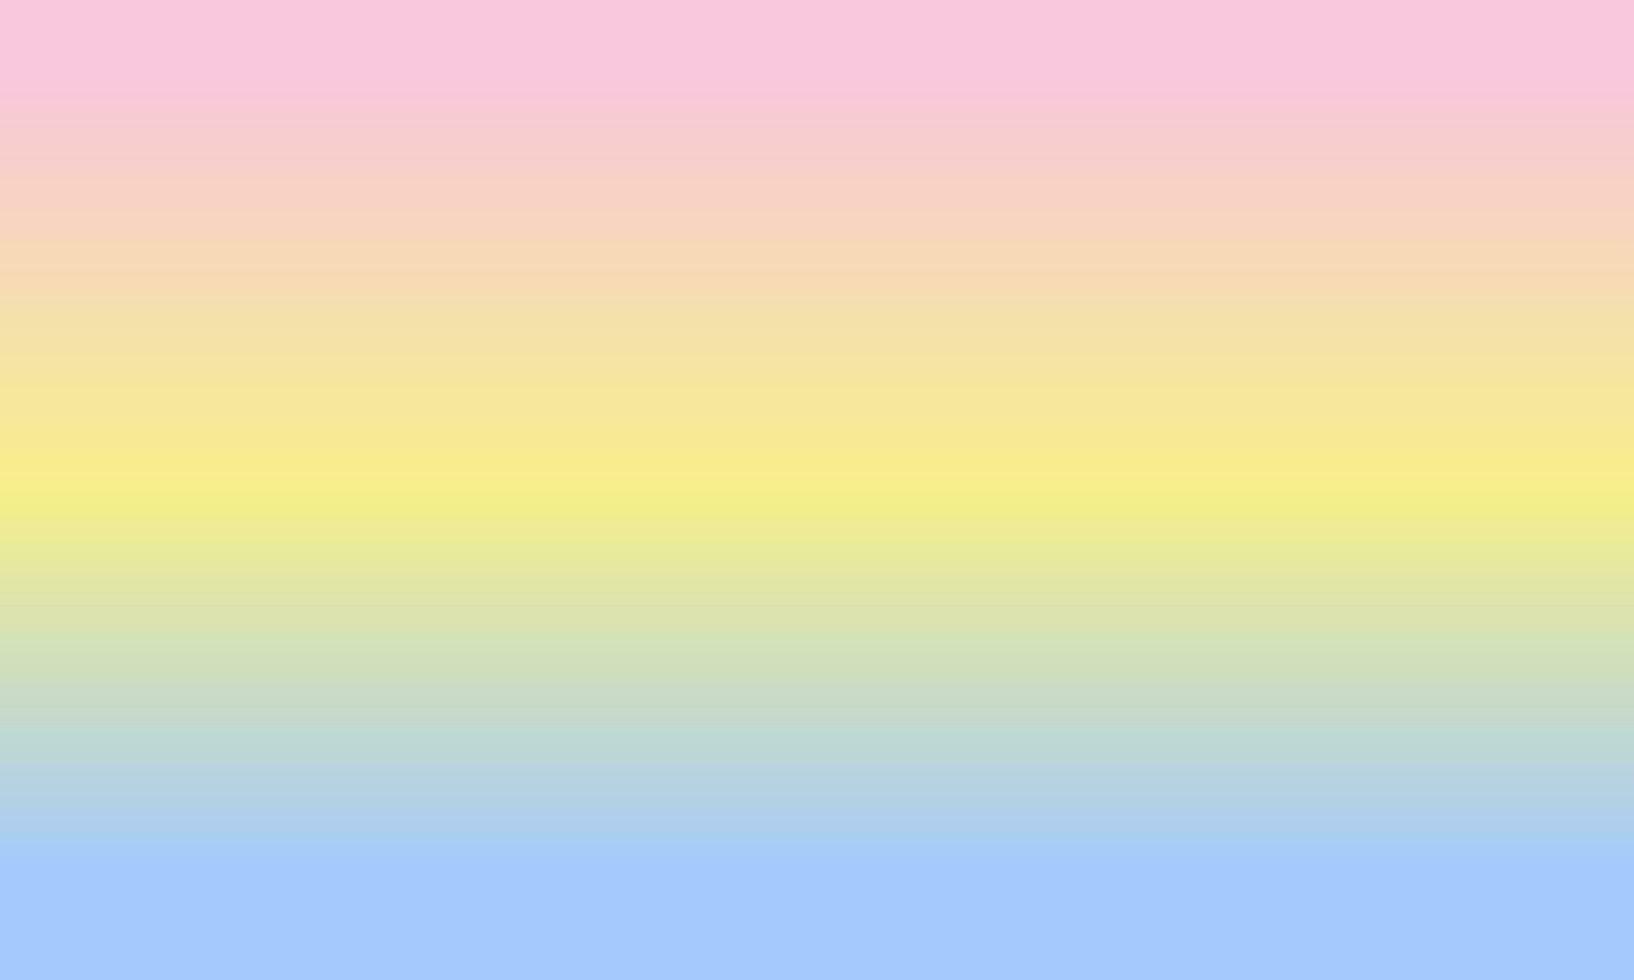 Design simple pink pastel,yellow and blue gradient color illustration background photo